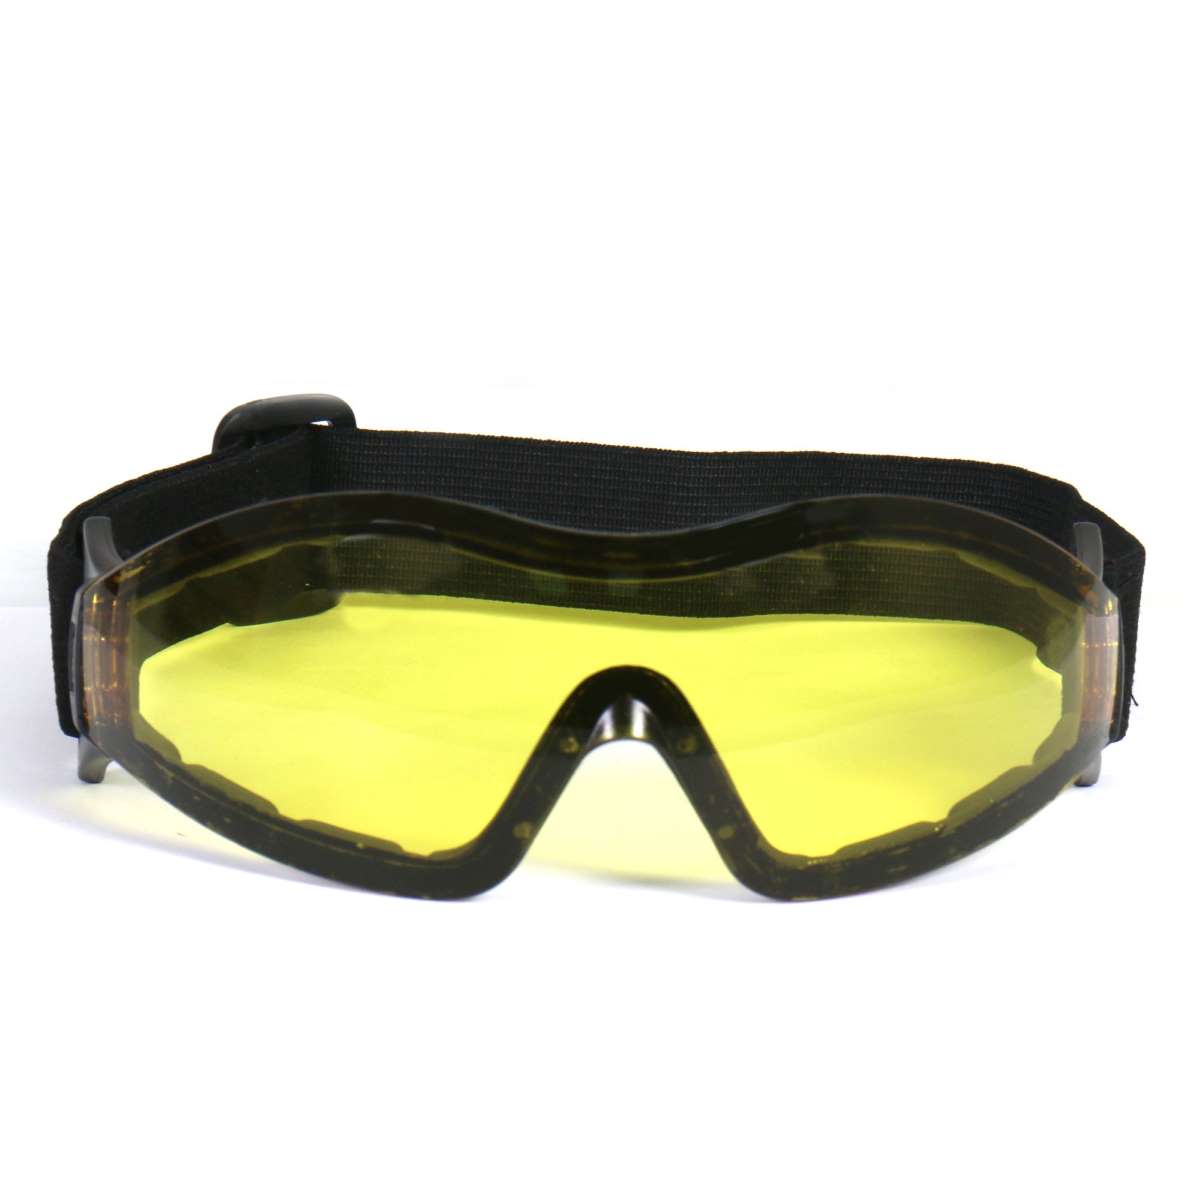 Hot Leathers Ares Safety Goggles with Yellow Lenses SGG1011